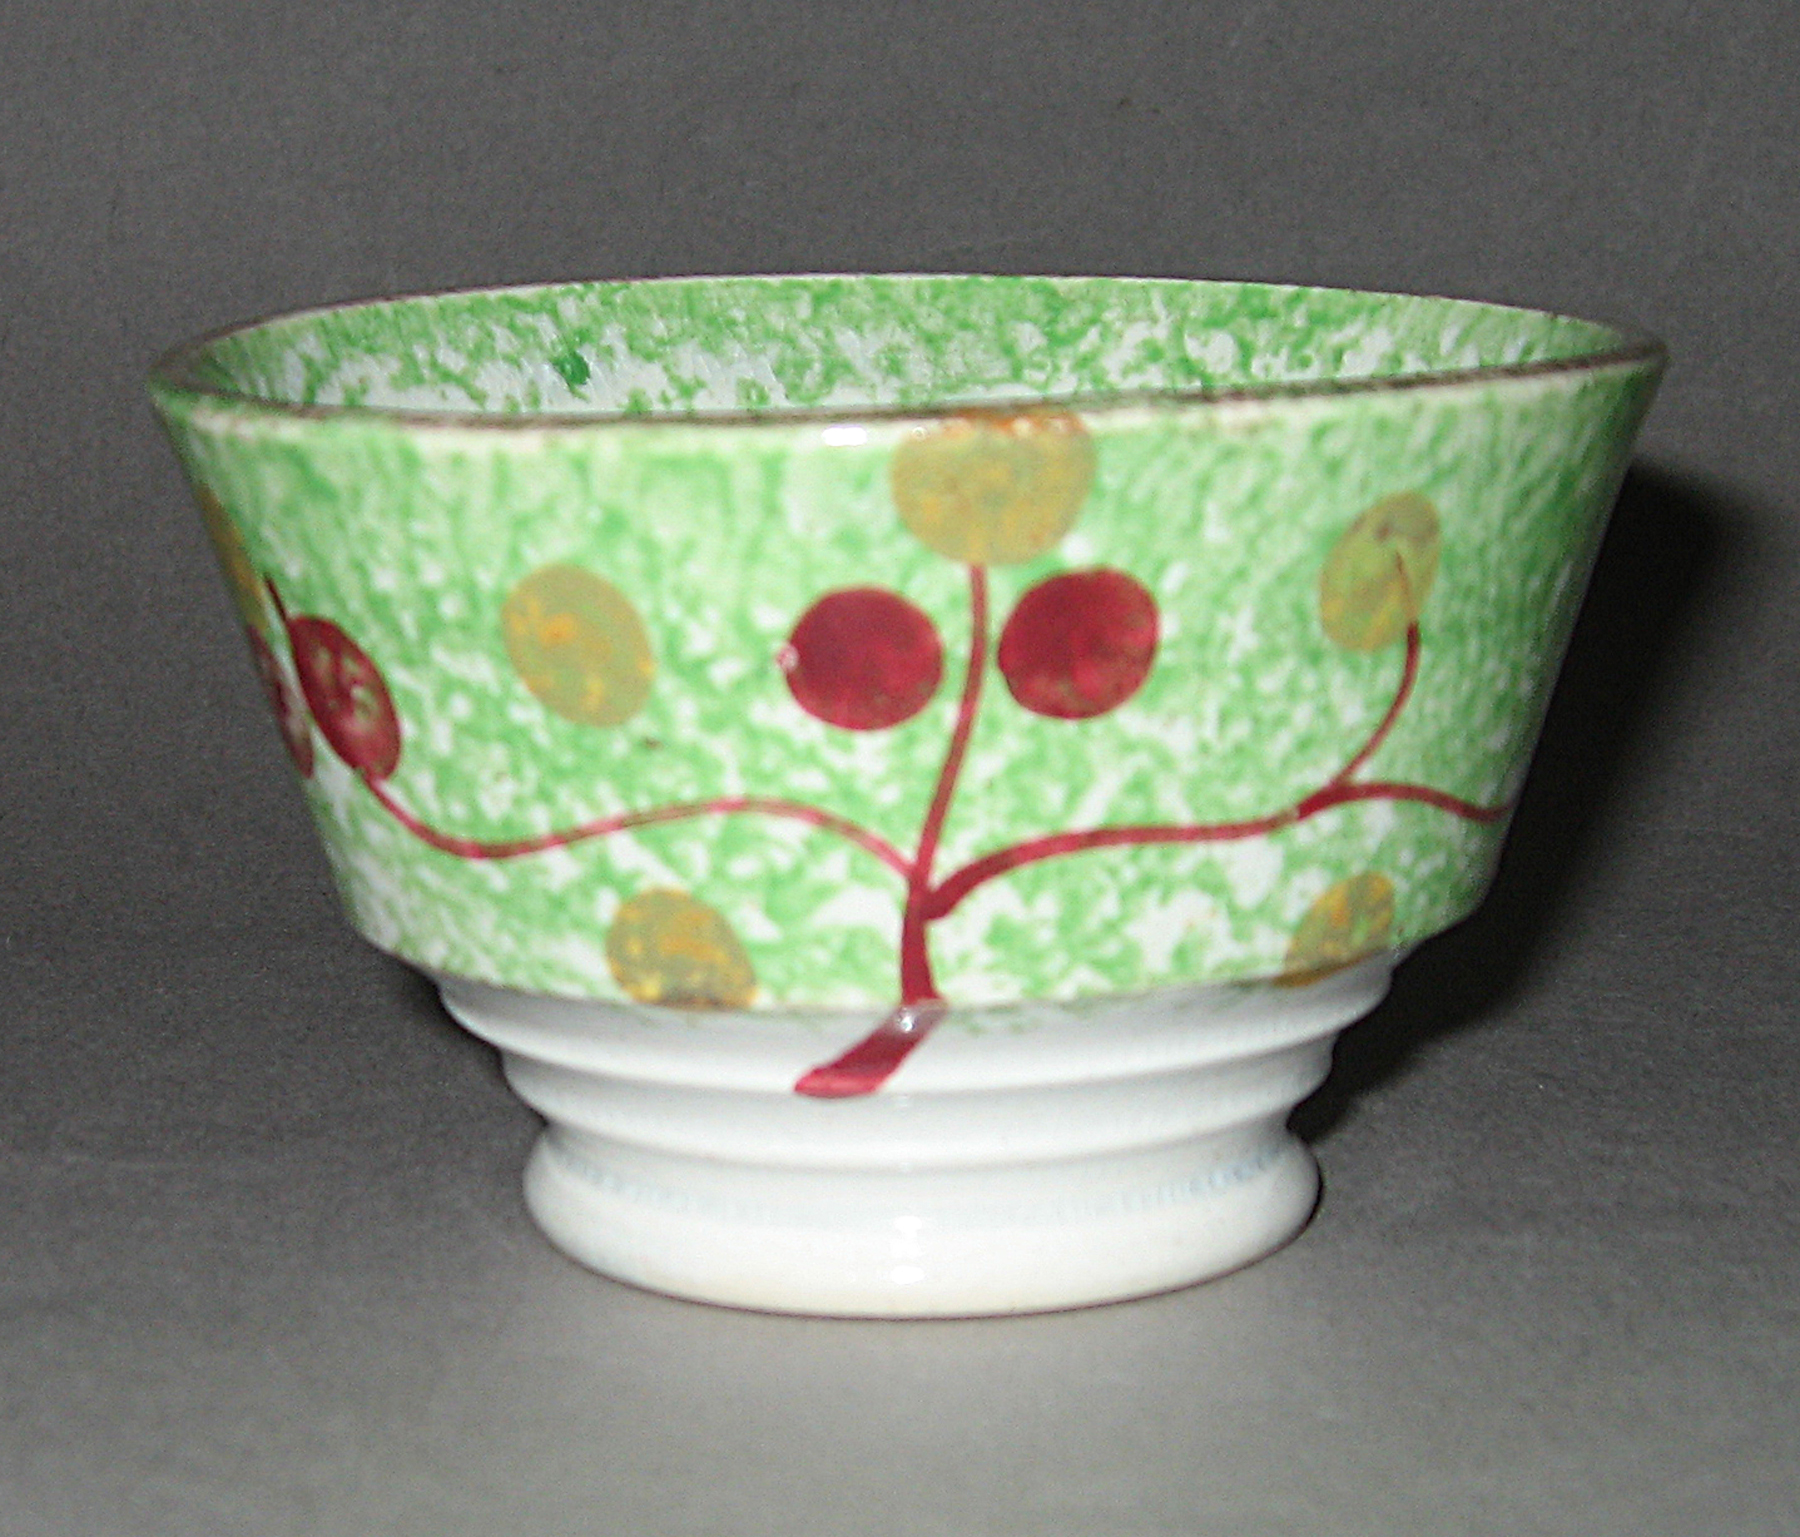 1965.0912.006 Vine and Berry spatterware teabowl